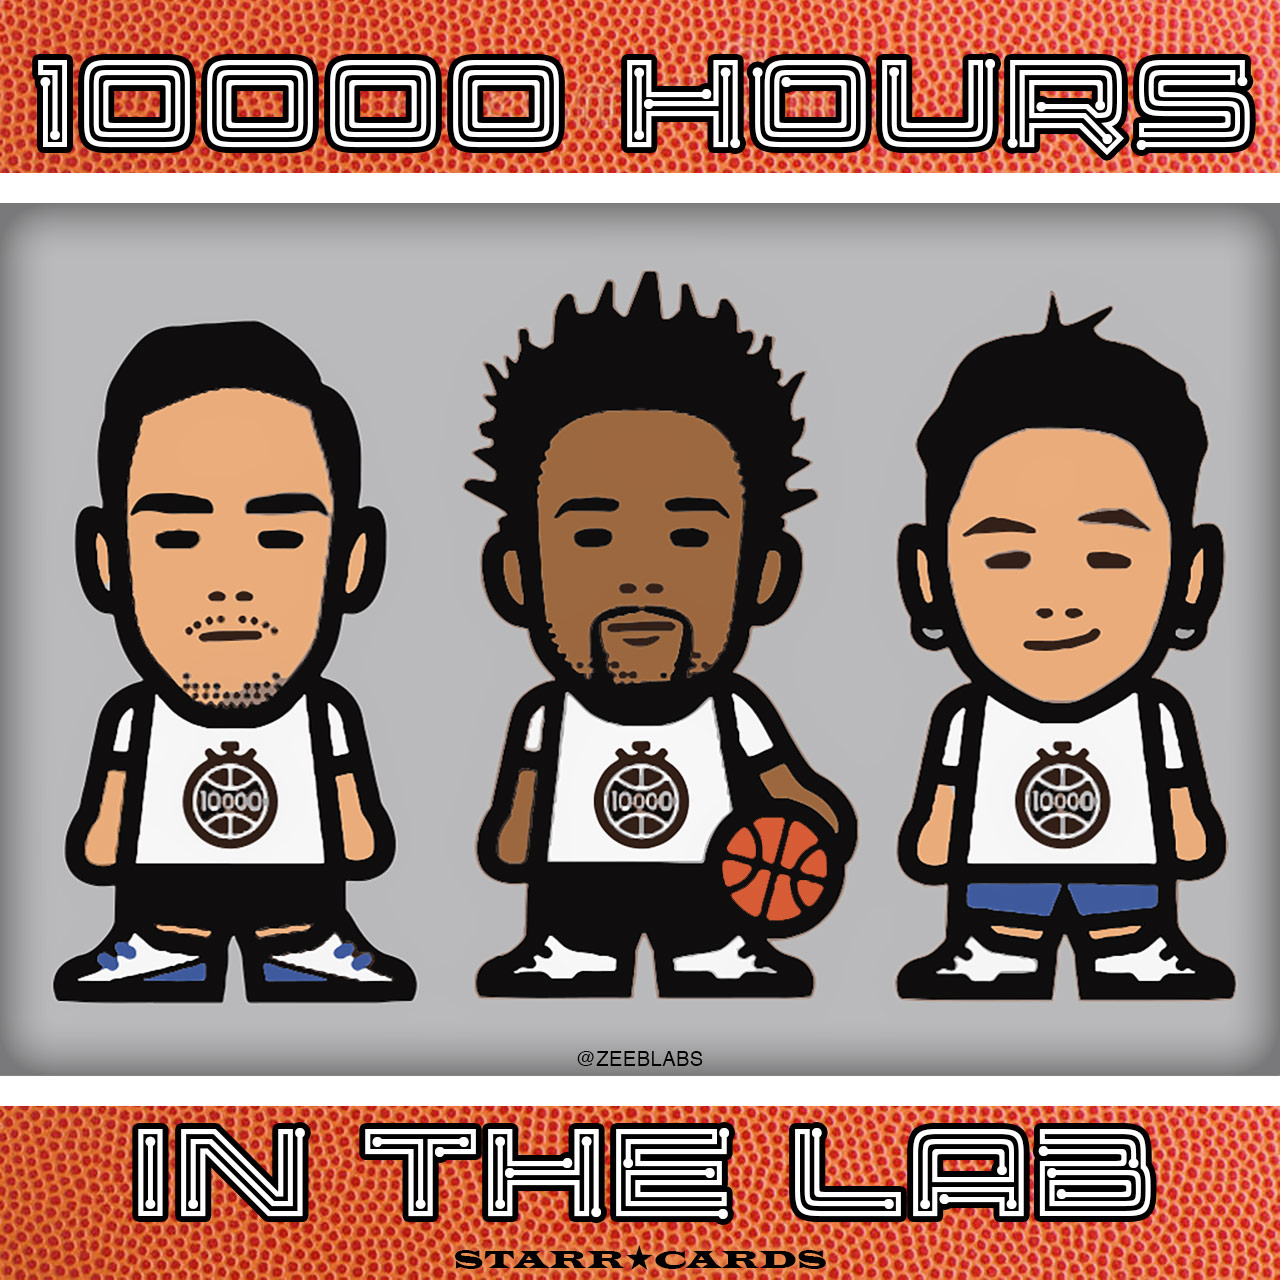 10000 Hours: Basketball trainer Devin Williams puts theory to the test